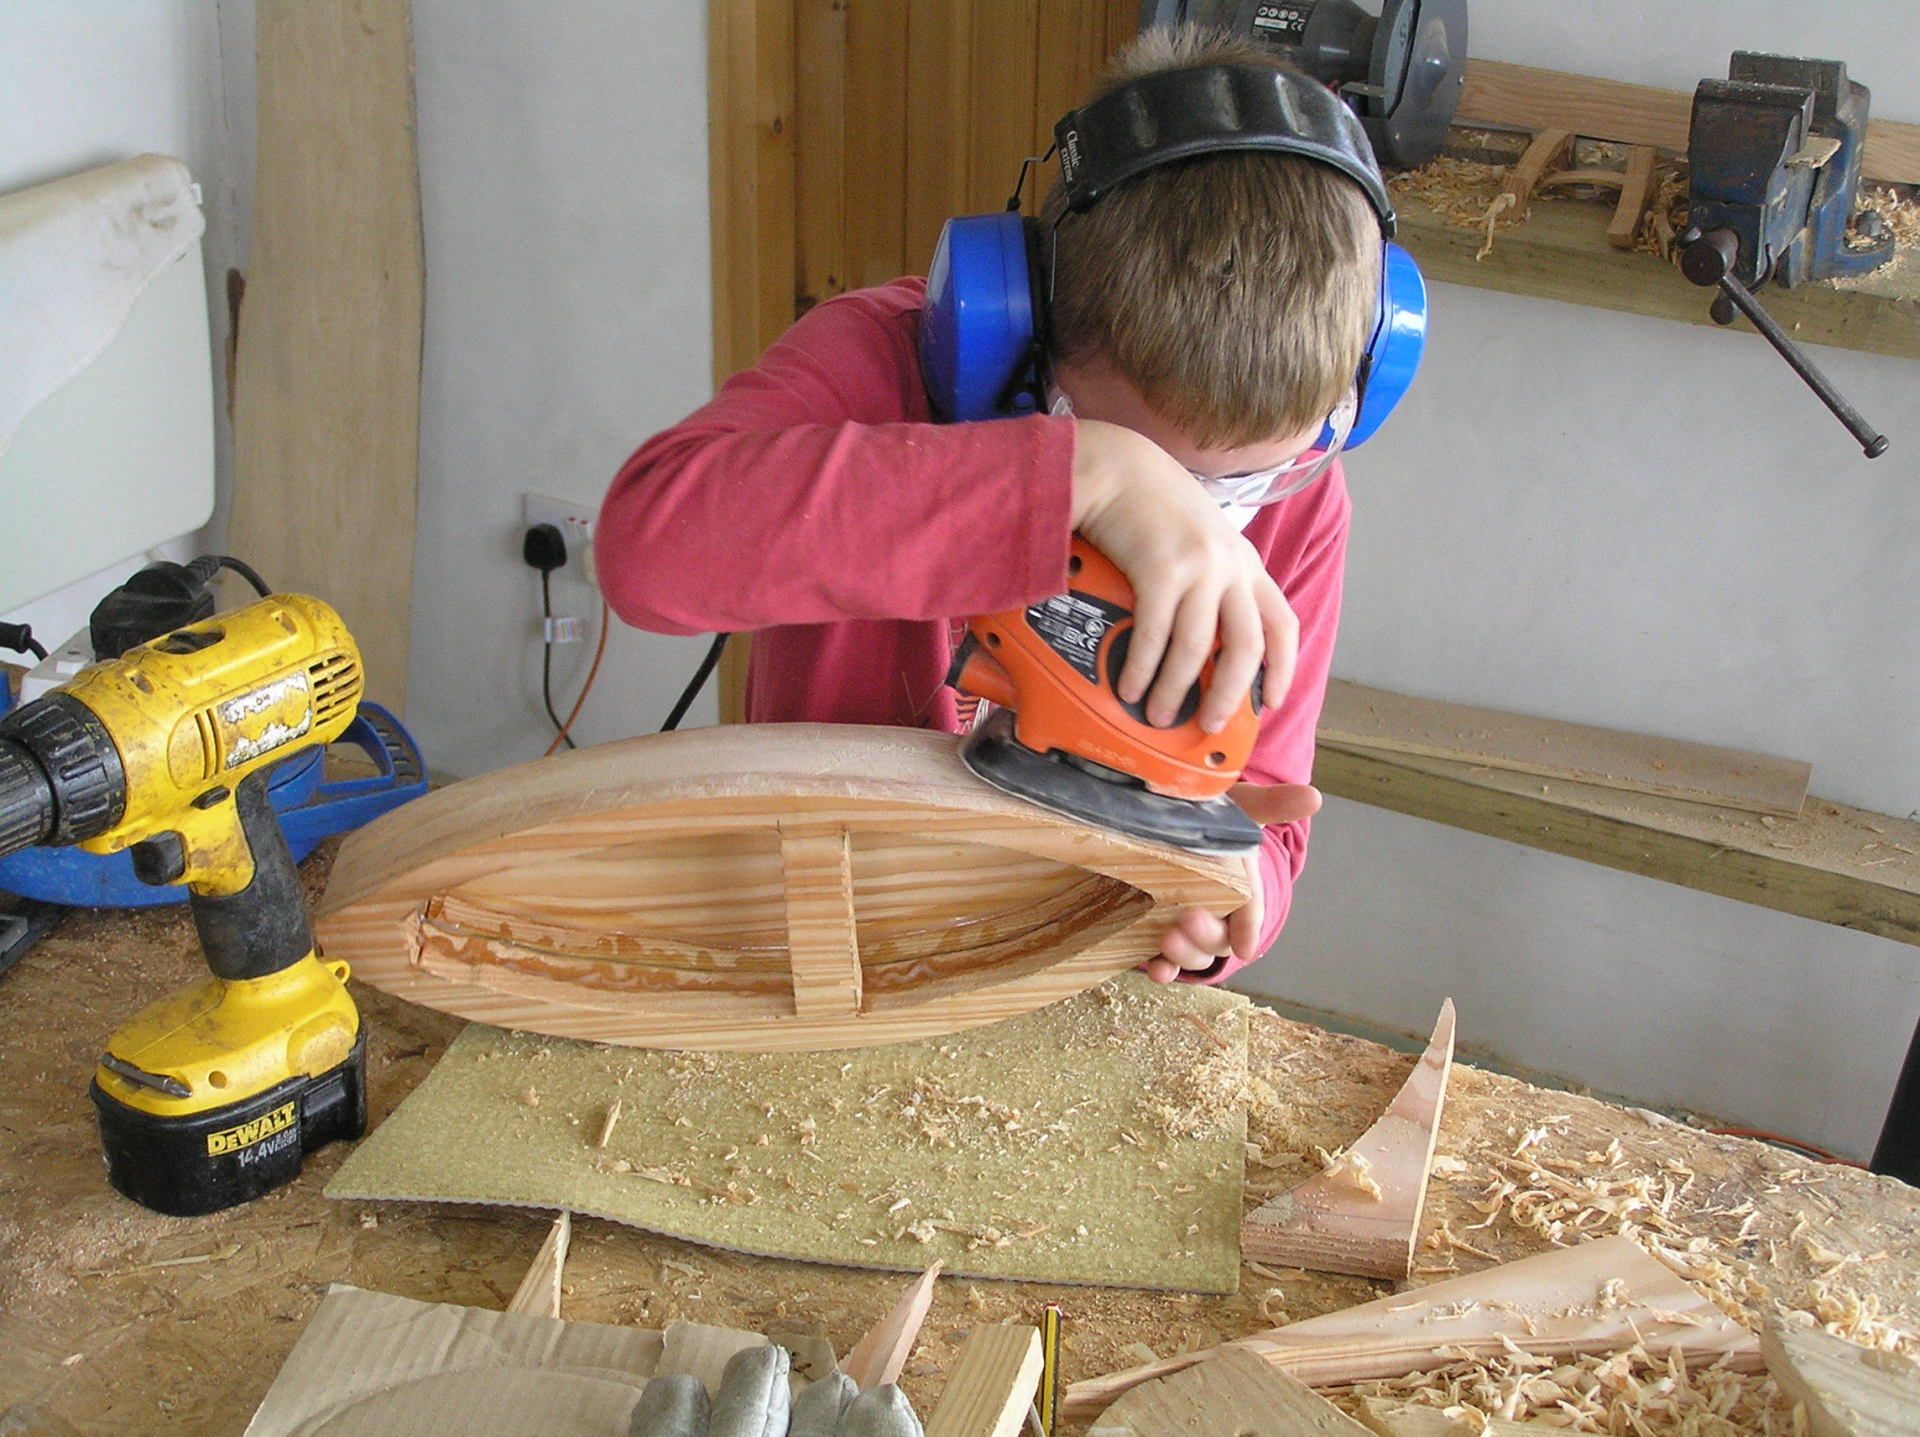 Young boy making a wooden boat